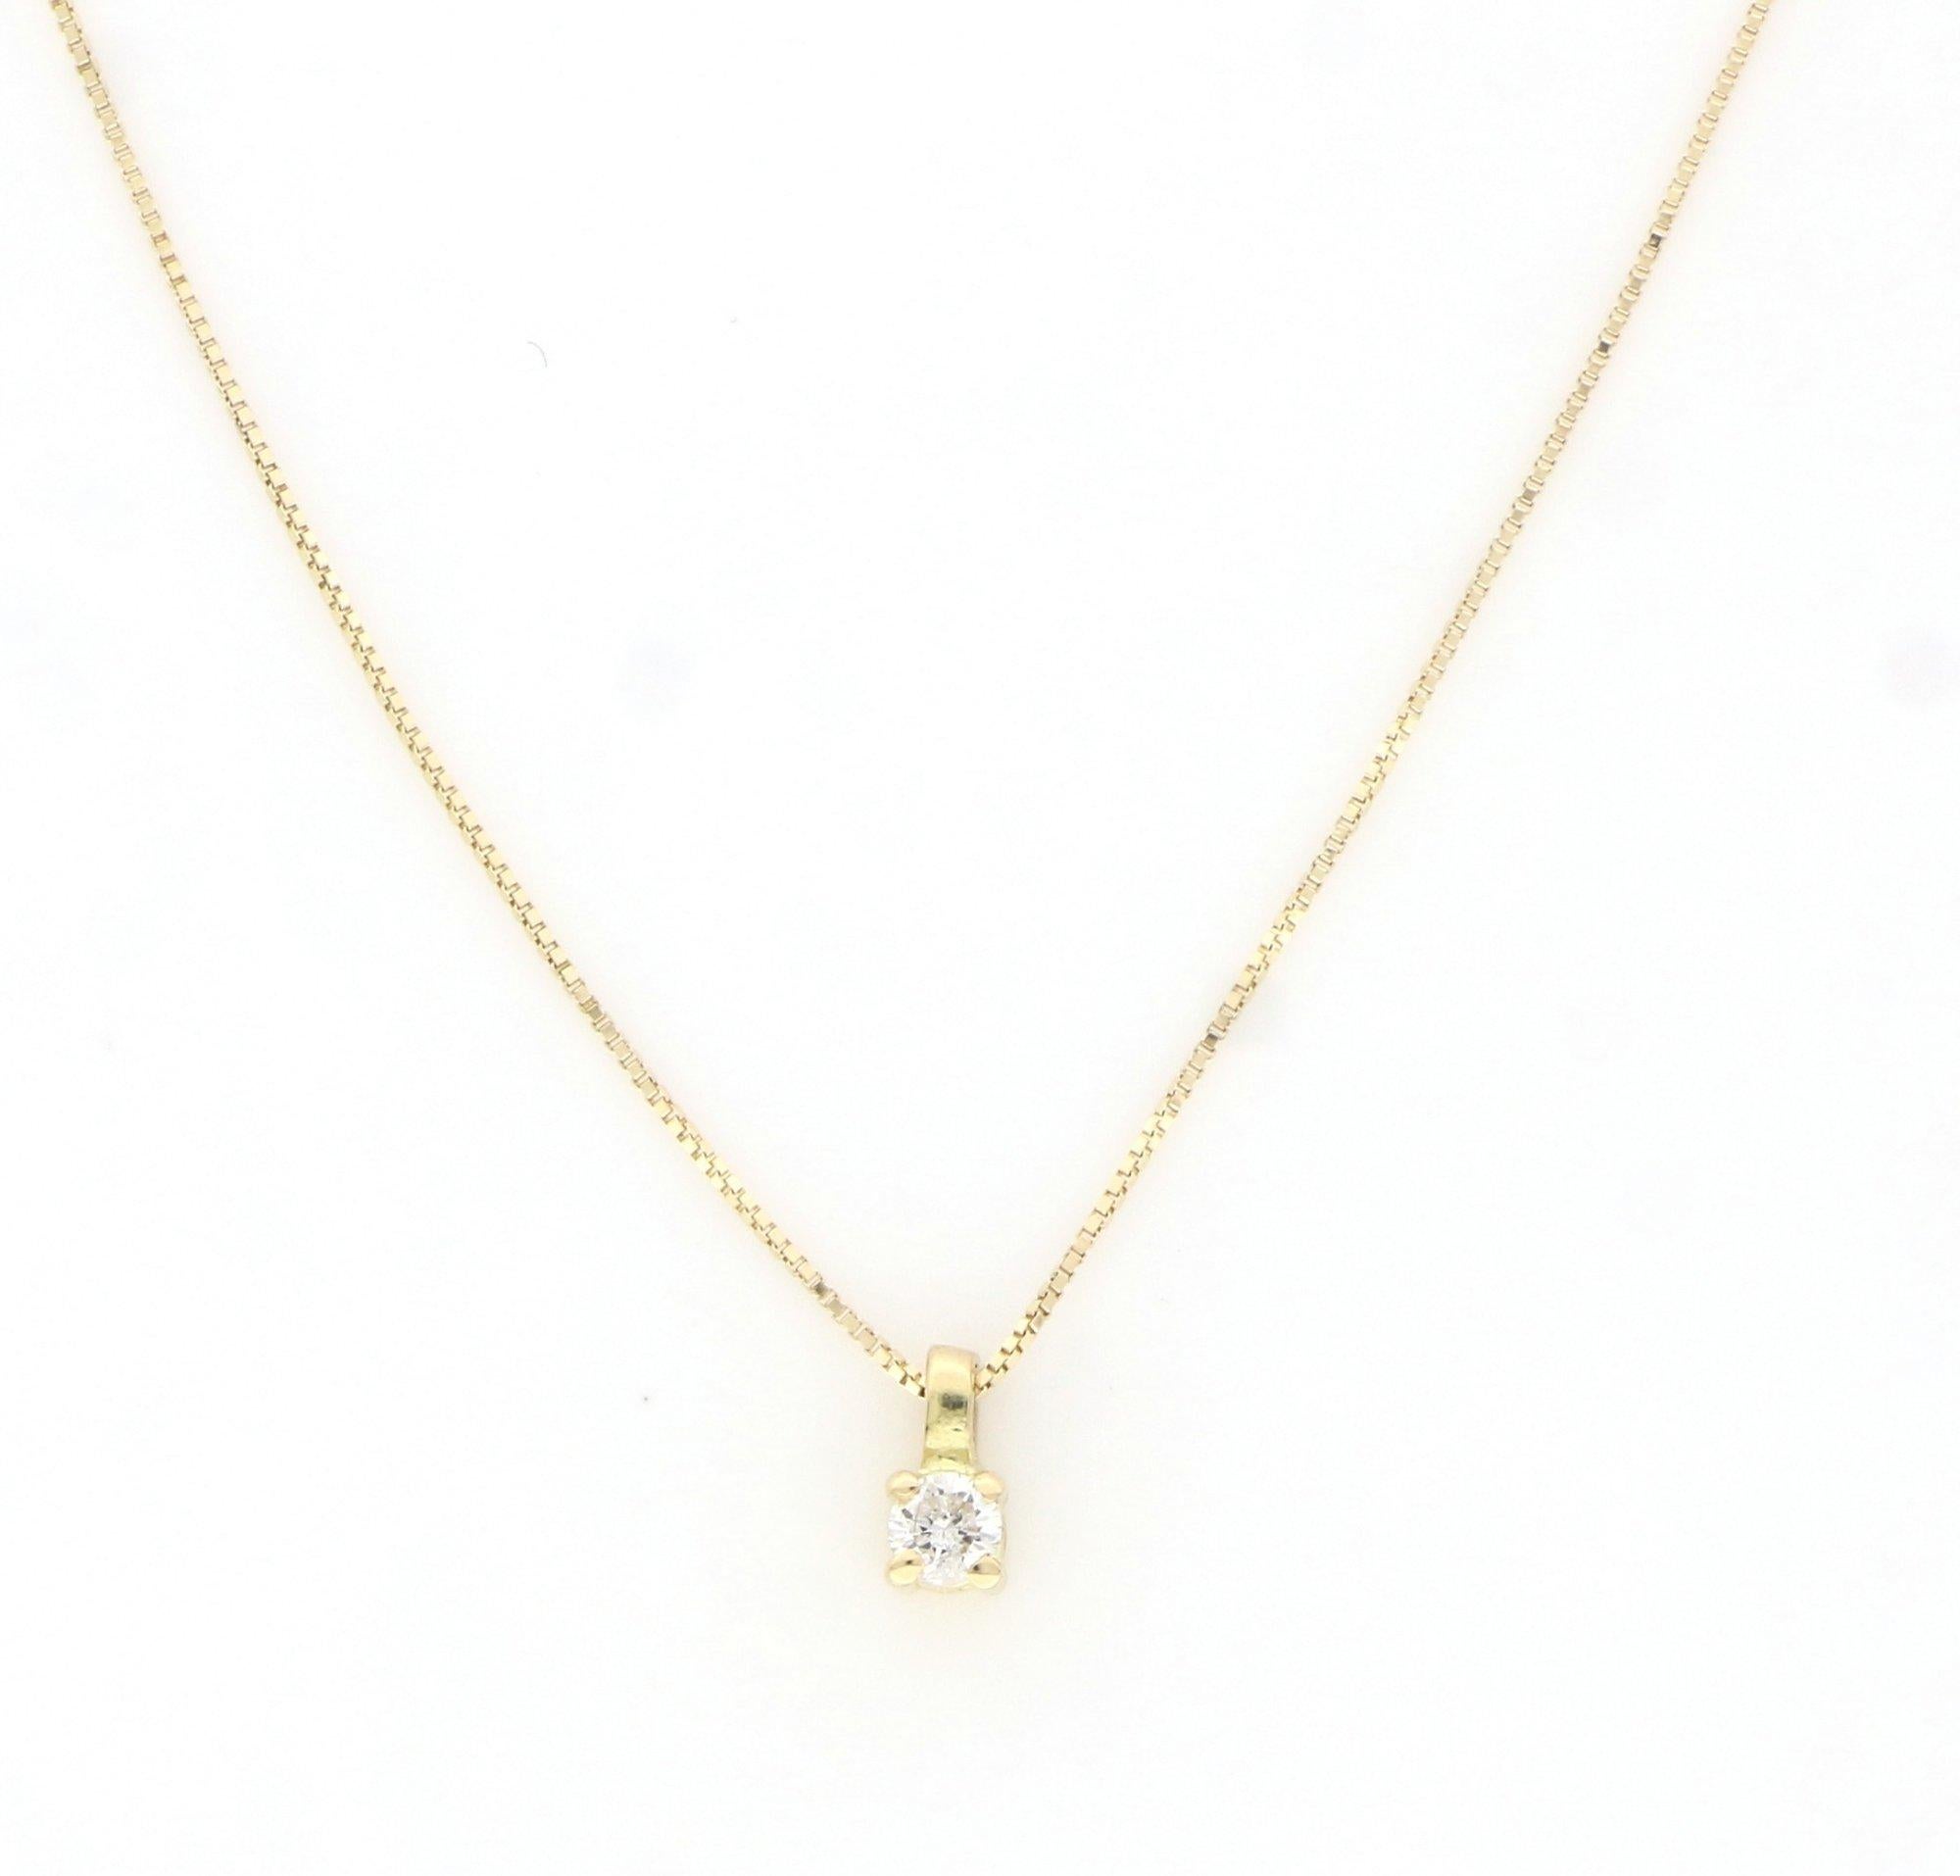 One of a kind 18 karat white gold light point design holding a 0.06 carat round brilliant diamond. A solitaire piece embellished with a 18k Yellow Gold 43 cm chain.

This jewel is inspired in the Greek ancient gods history where Astraios was the